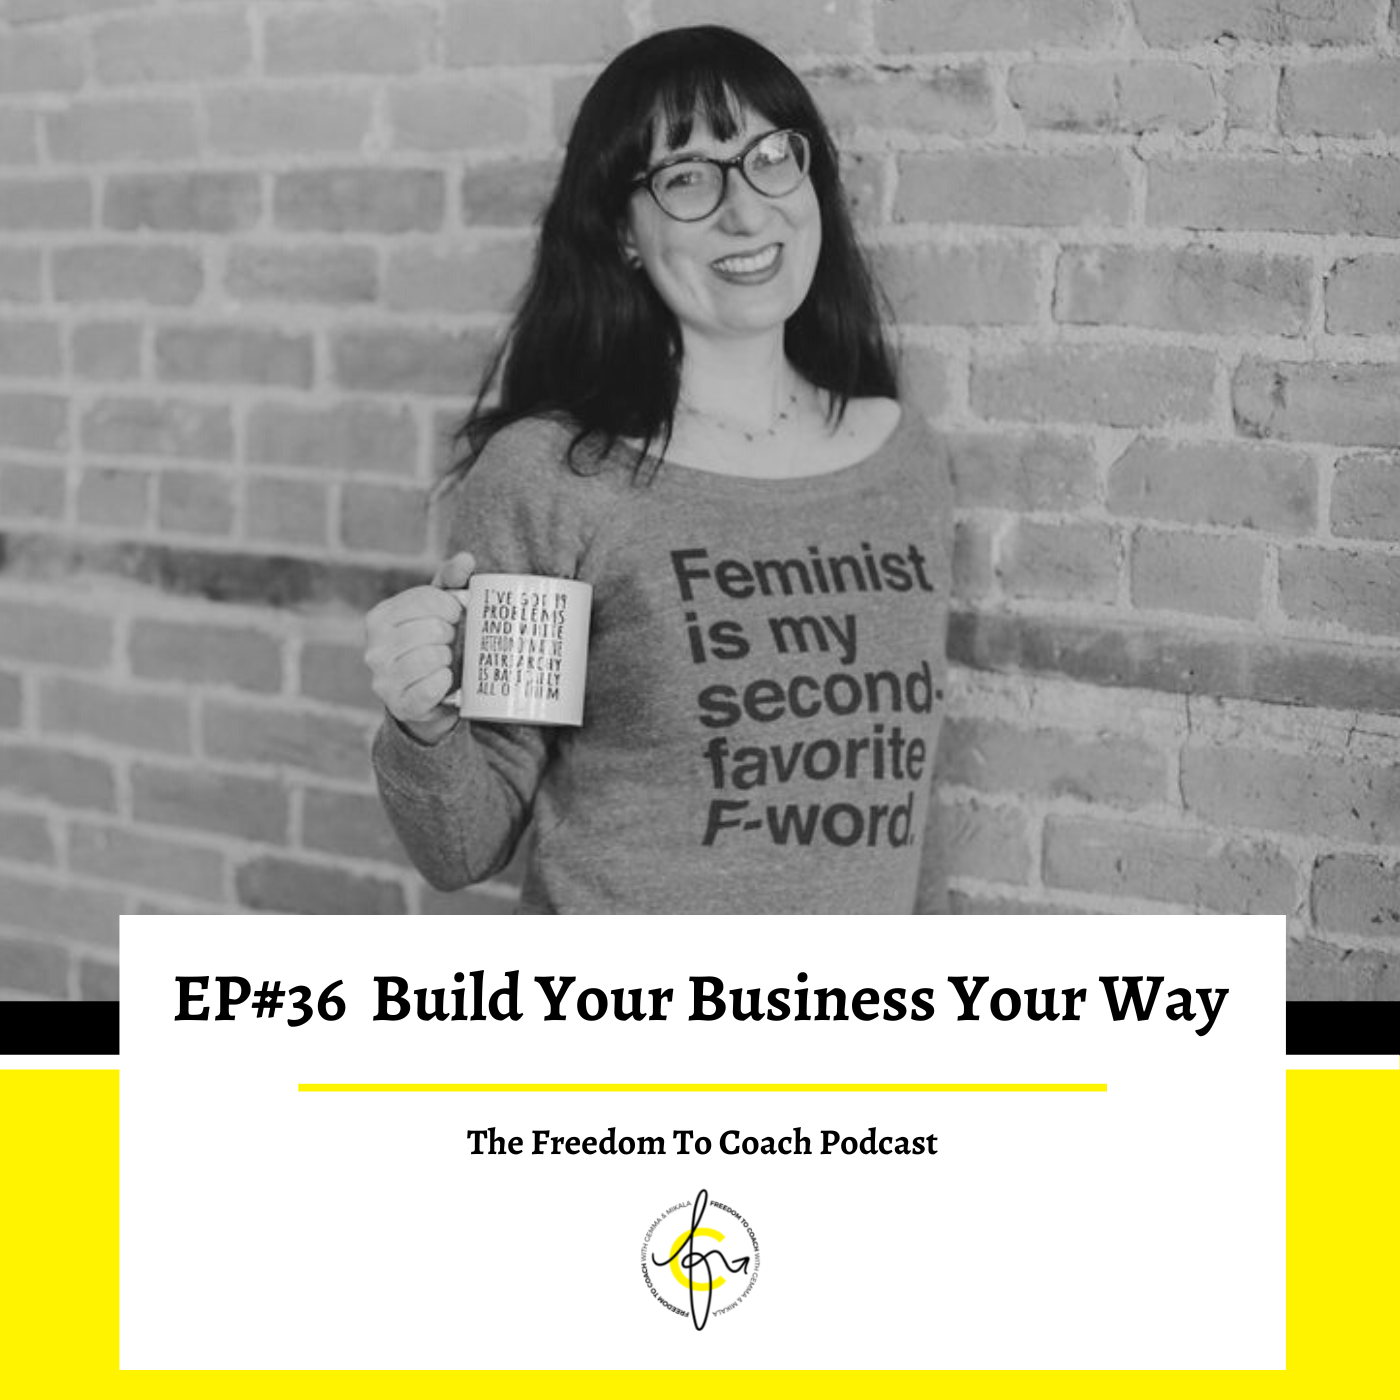 New Interview: Build Your Business Your Way on the Freedom to Coach Podcast